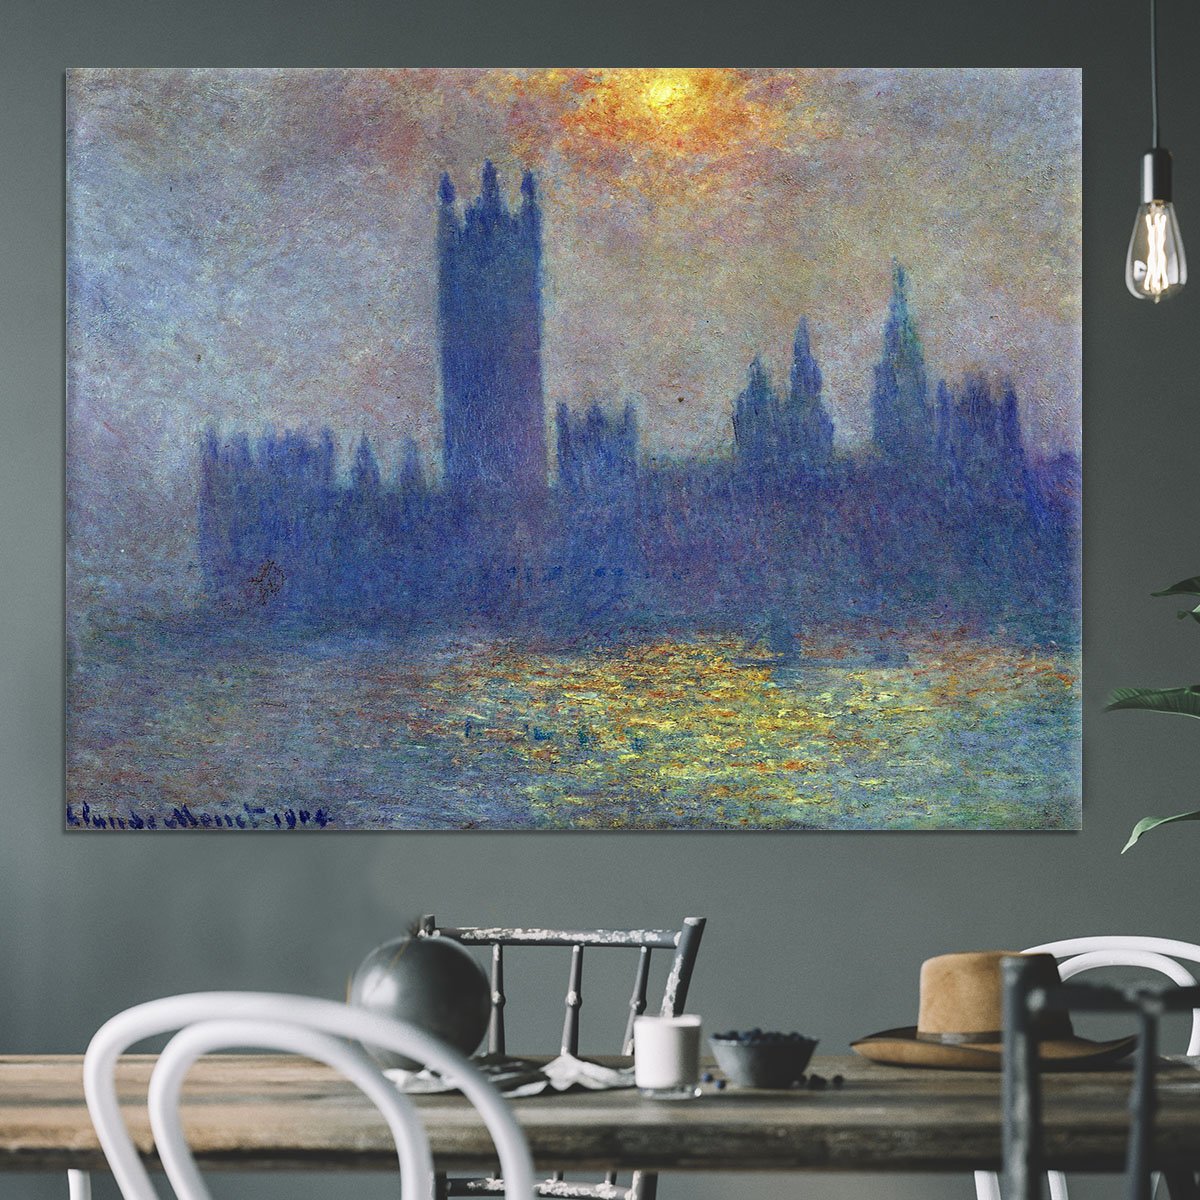 The Houses of Parliament sunlight in the fog by Monet Canvas Print or Poster